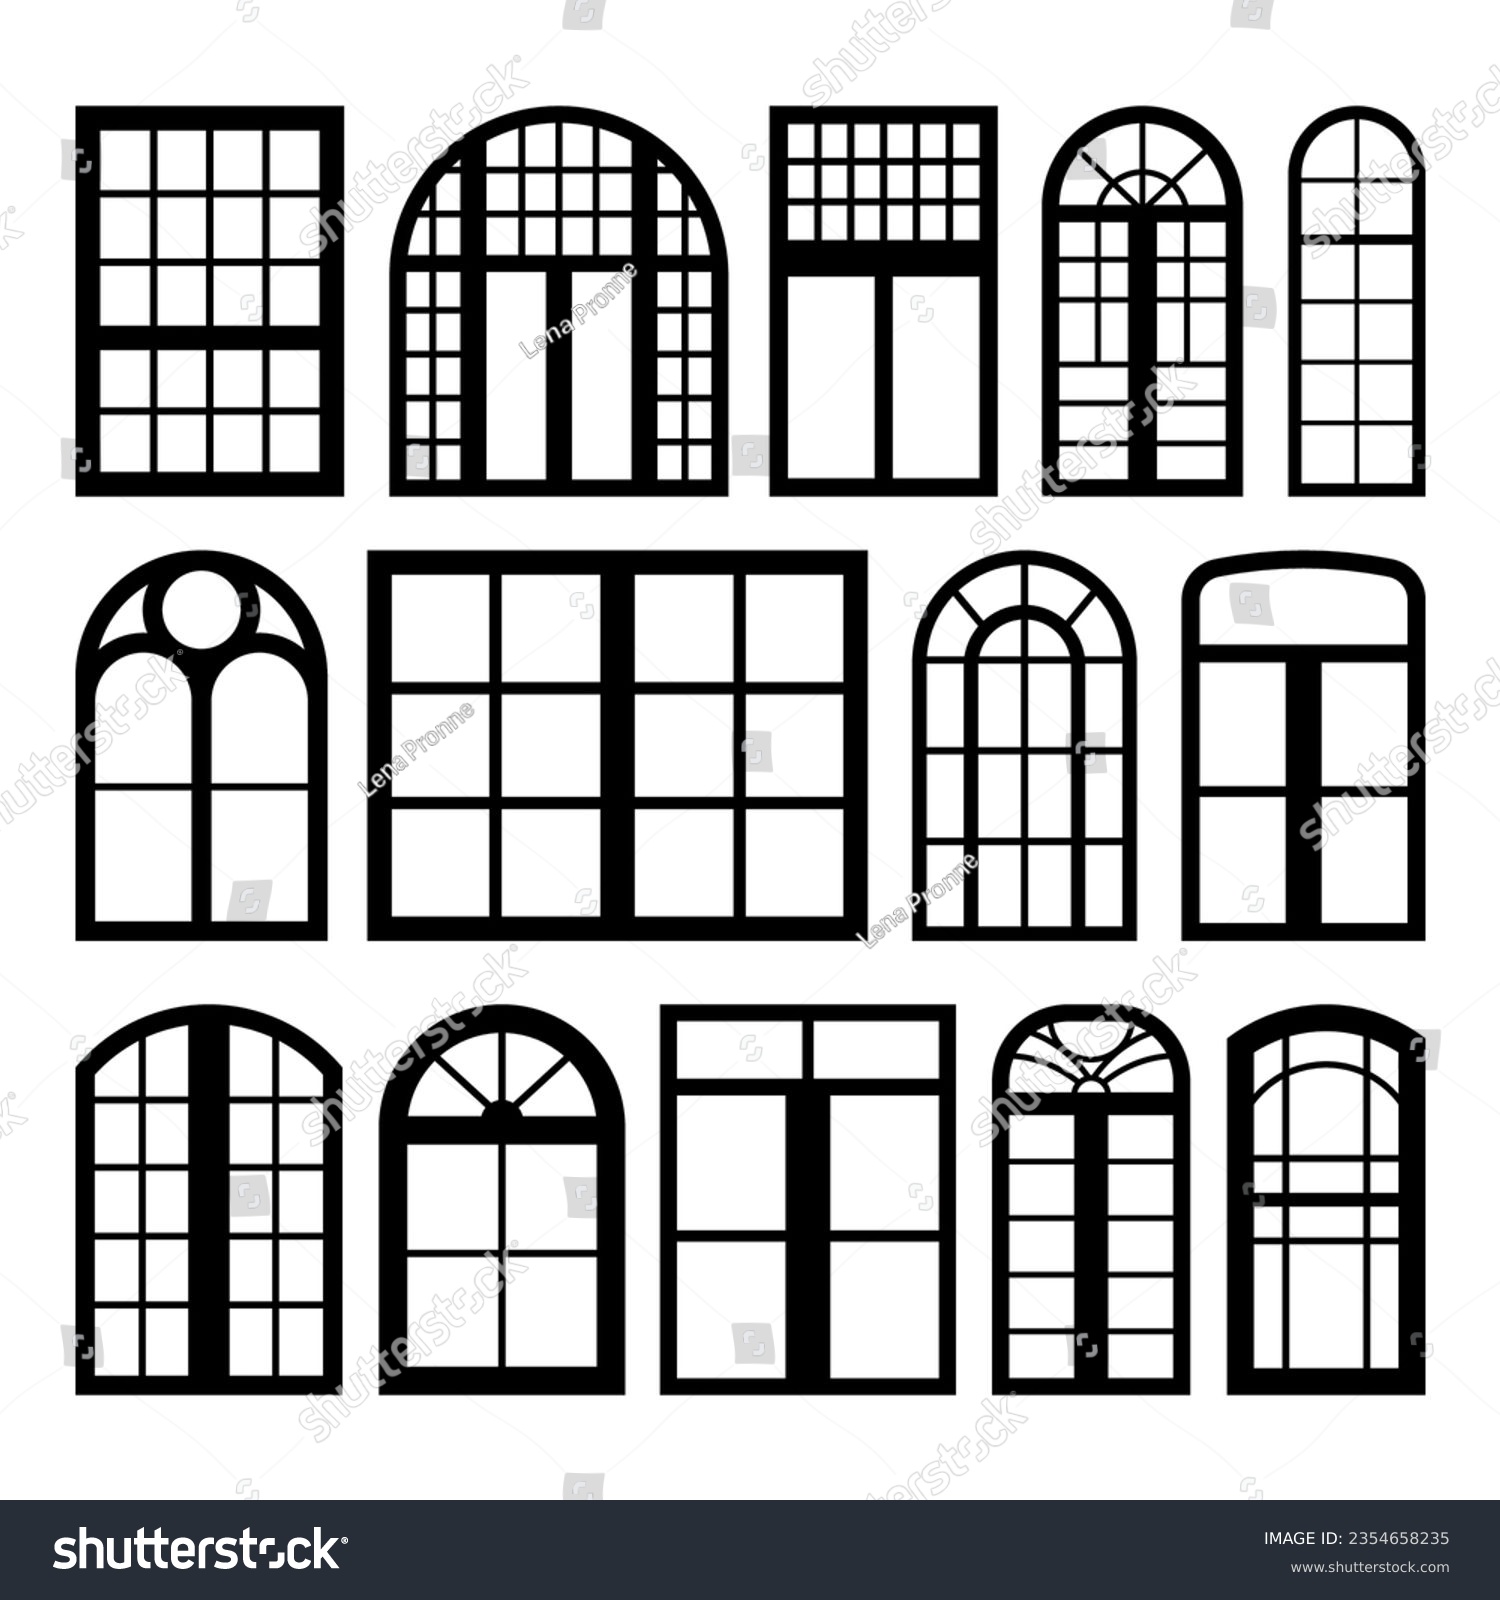 SVG of Window silhouette stencil templates cliparts svg